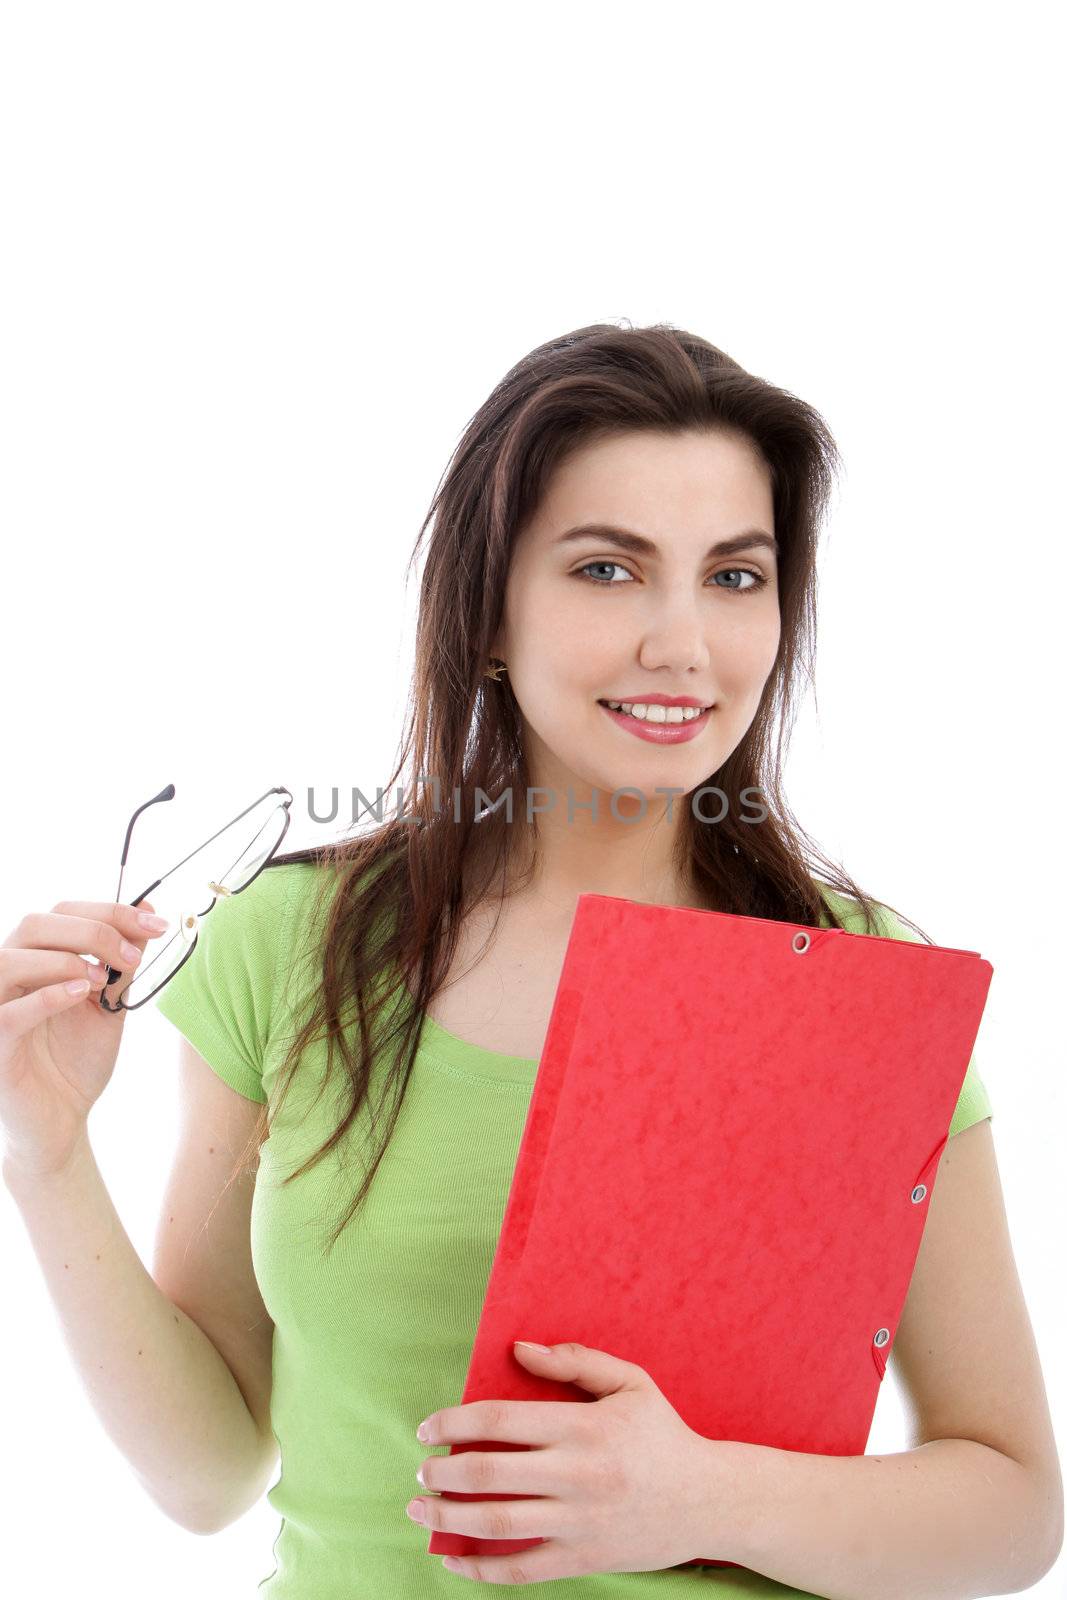 Smiling woman holding red folder and glasses over the white background